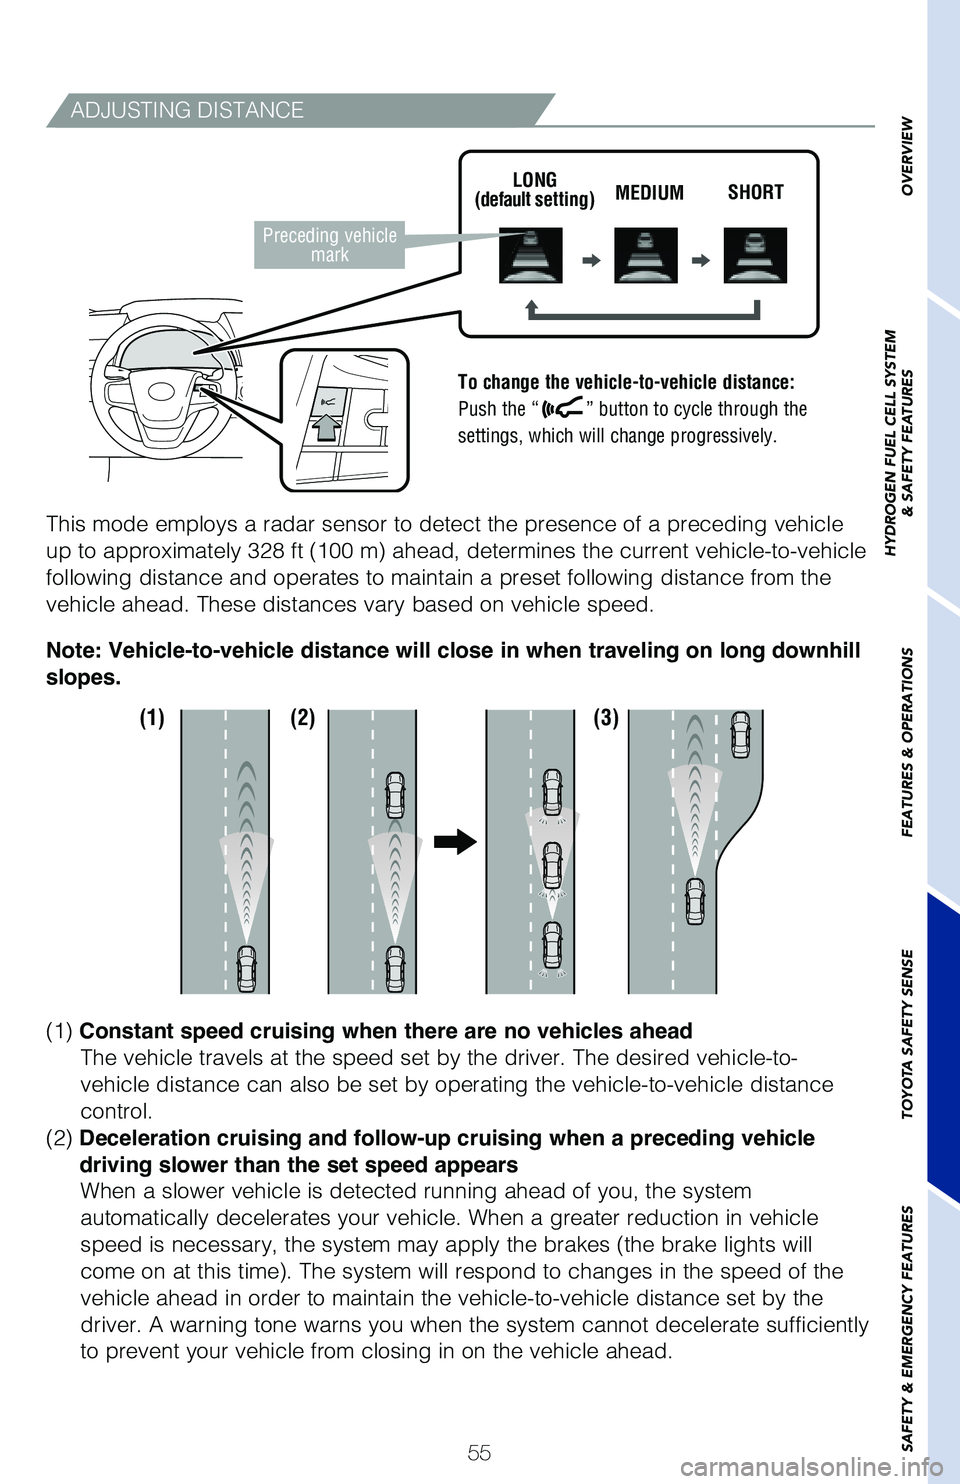 TOYOTA MIRAI 2021  Owners Manual (in English) 55
ADJUSTING DISTANCE
This mode employs a radar sensor to detect the presence of a preceding v\
ehicle 
up to approximately 328 ft (100 m) ahead, determines the current vehic\
le-to-vehicle 
following